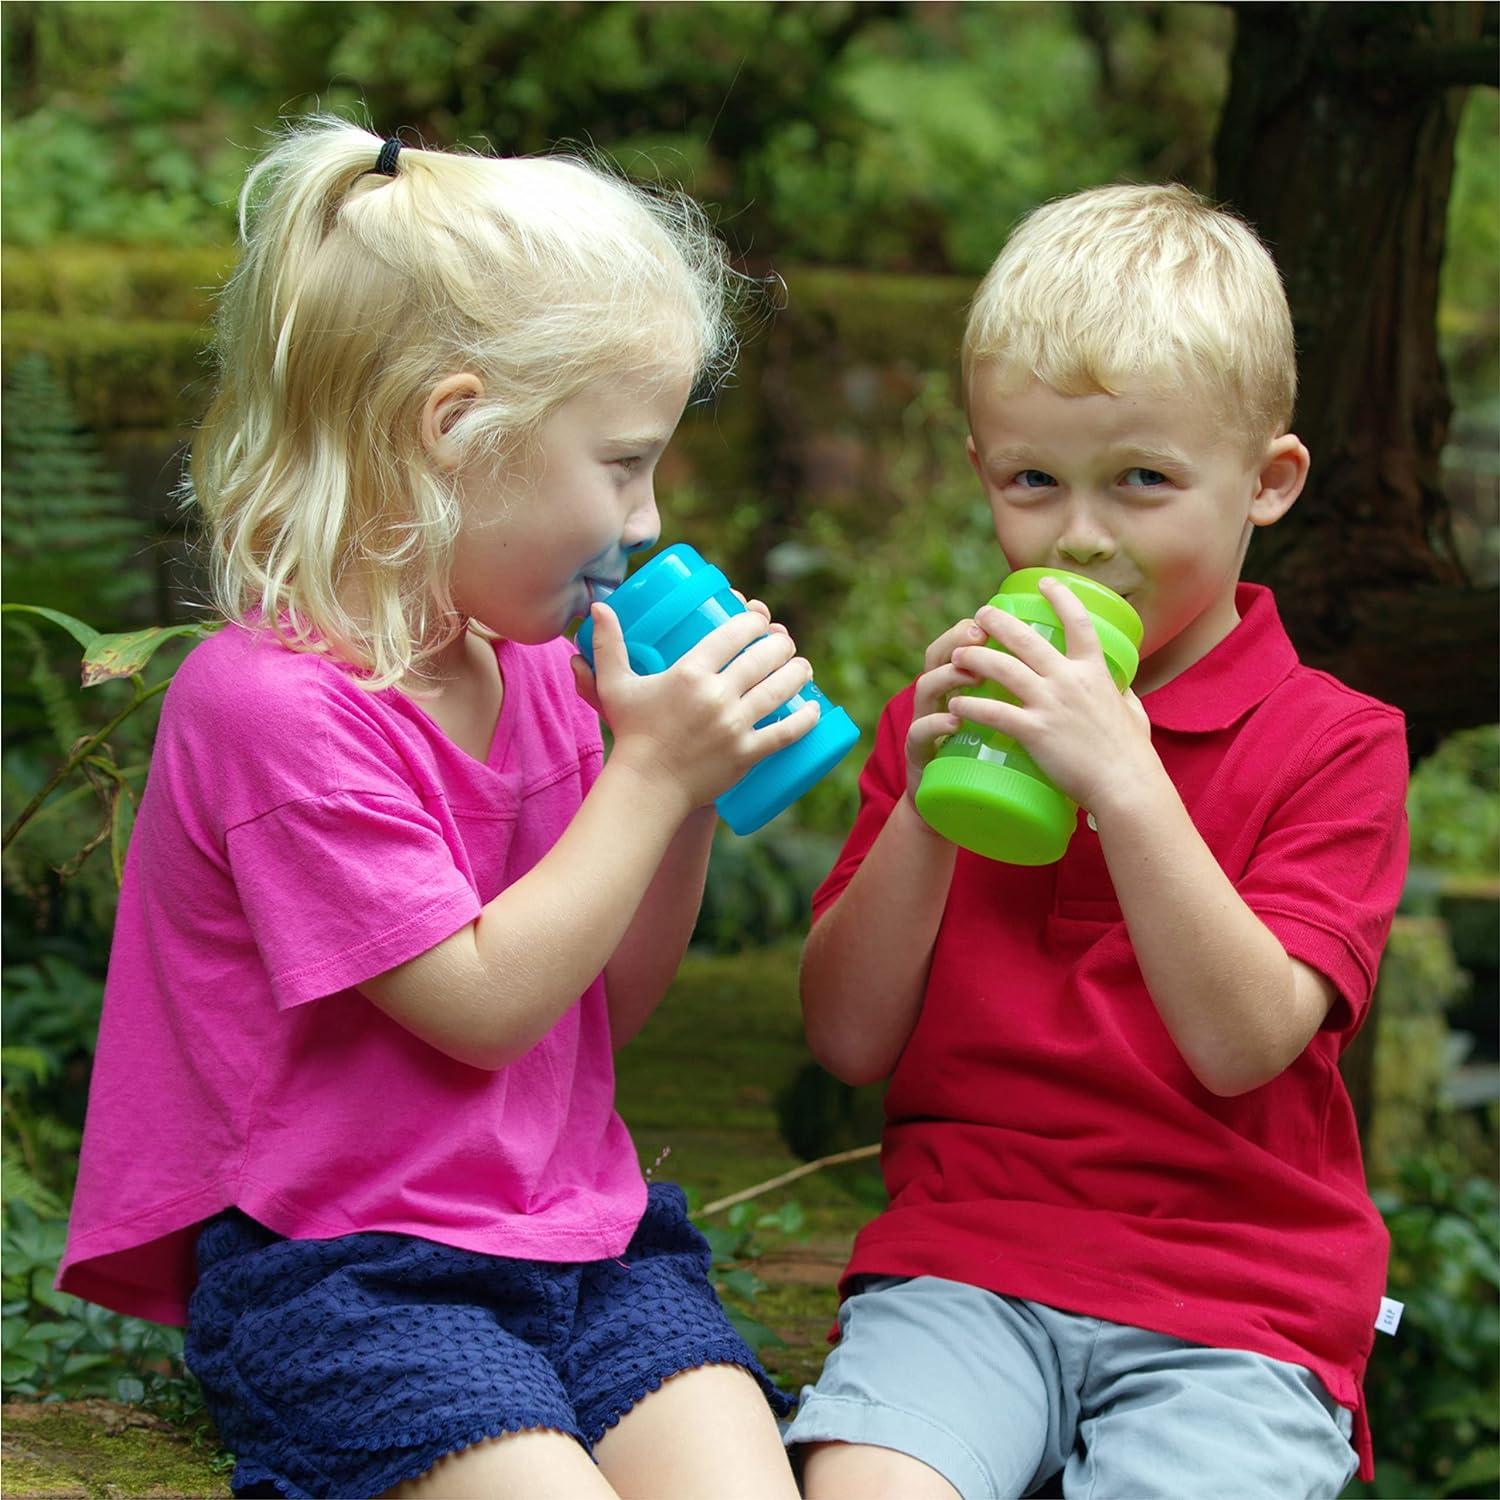 Smilo Sippy Cup 2 Pack for Toddlers (1+ years) with Spill Proof & Fold-Away  Silicone Spout - 8.5 oz Capacity - BPA-Free Toddler Cups Made in the USA -  Aqua & Green